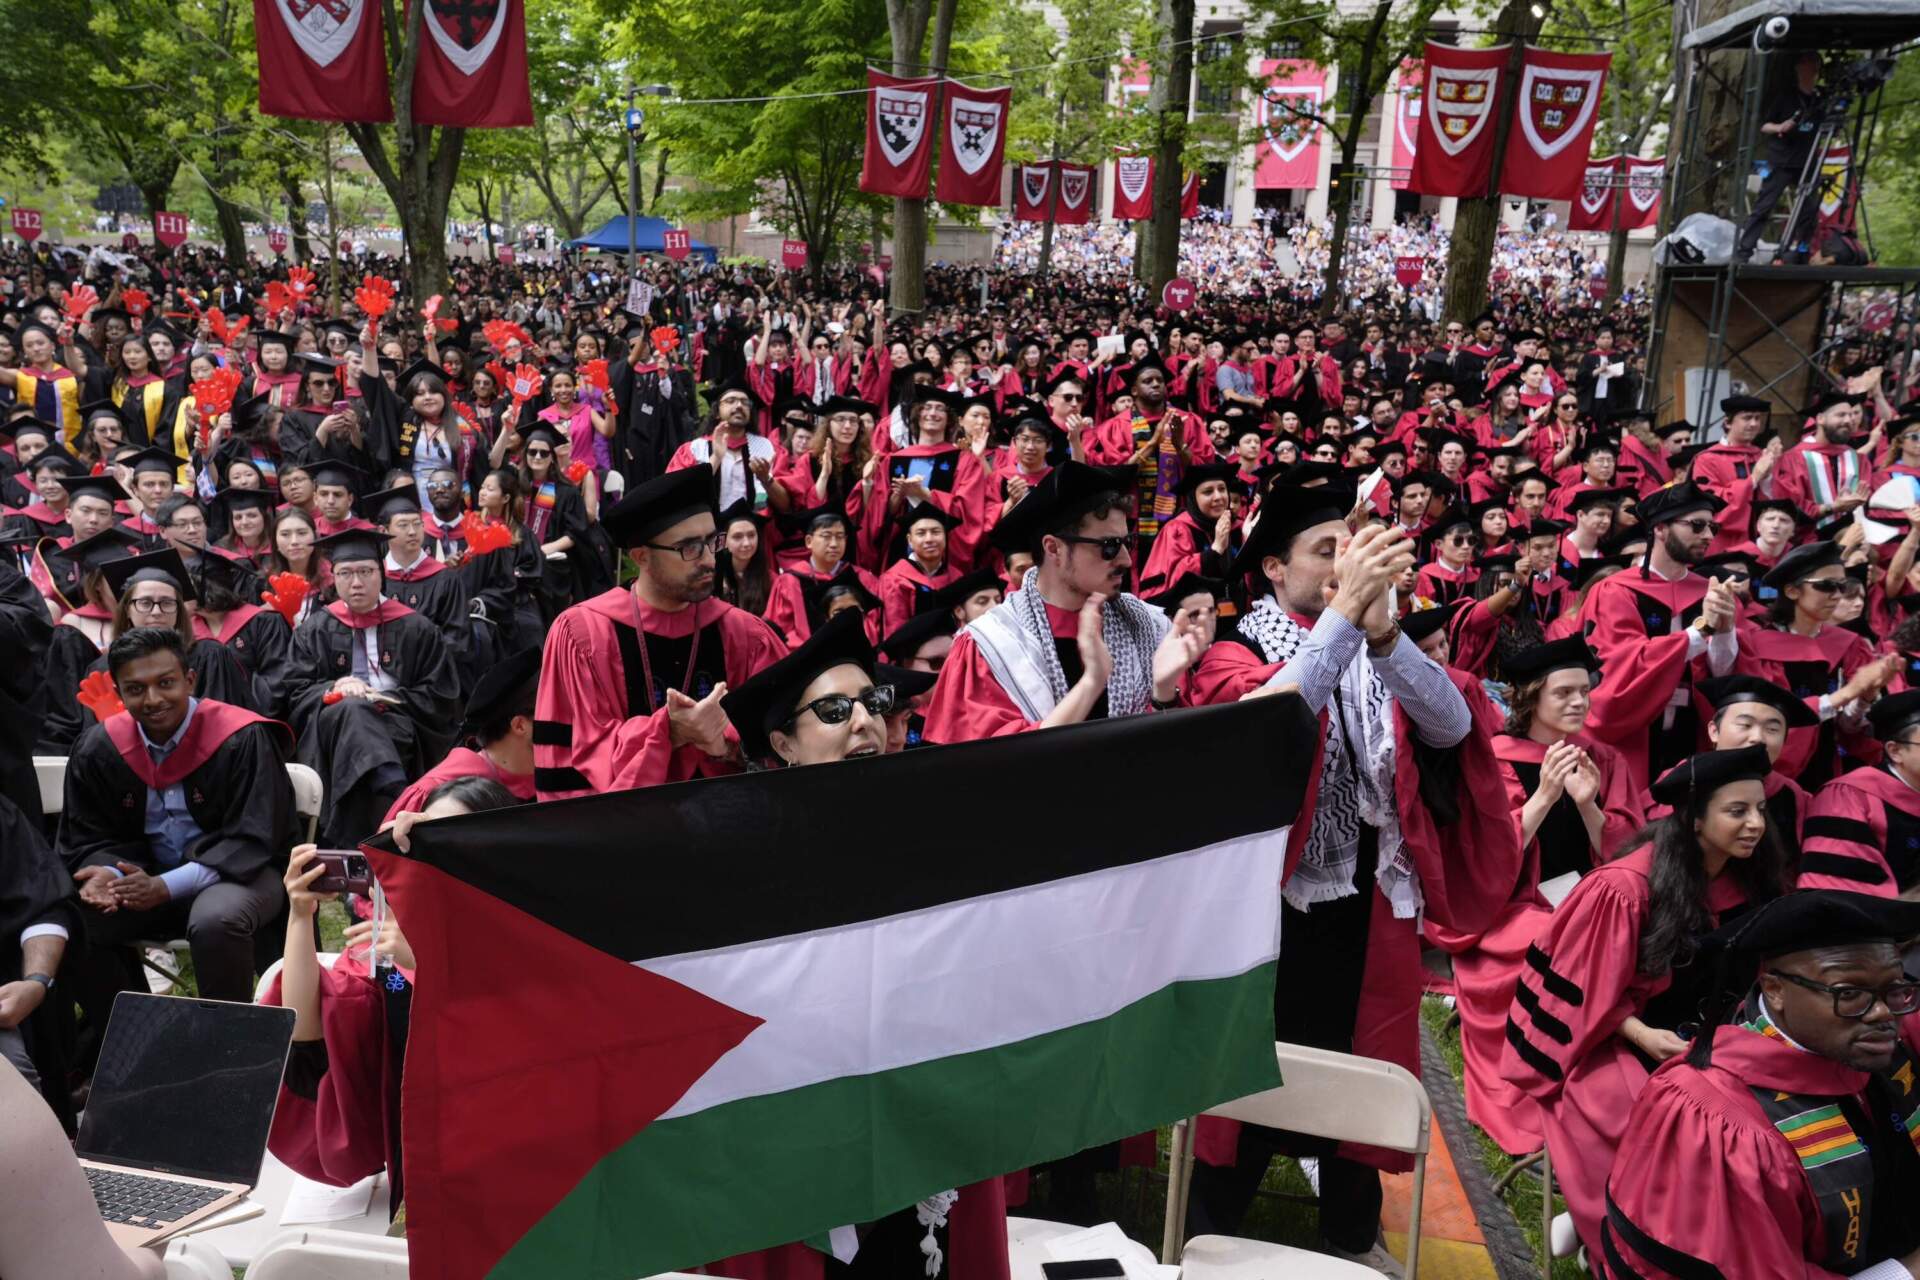 A student holds up the flag of Palestine as the 13 students, who have been barred from graduating due to protest activities, are recognized by a student address speaker during the commencement at Harvard University. (Charles Krupa/AP)